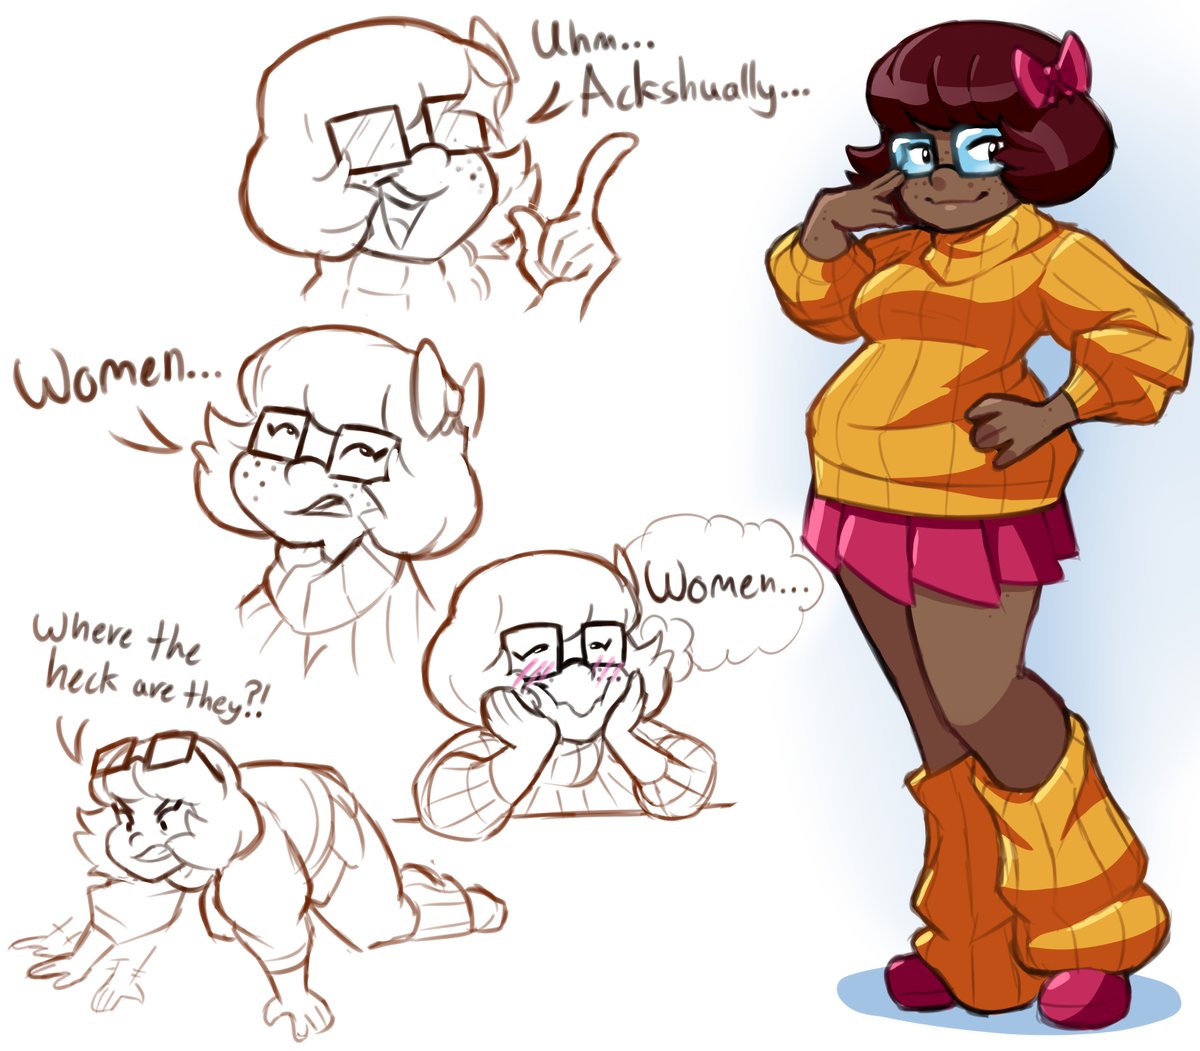 Reposting this Velma redesign for no reason in particular, just felt like it